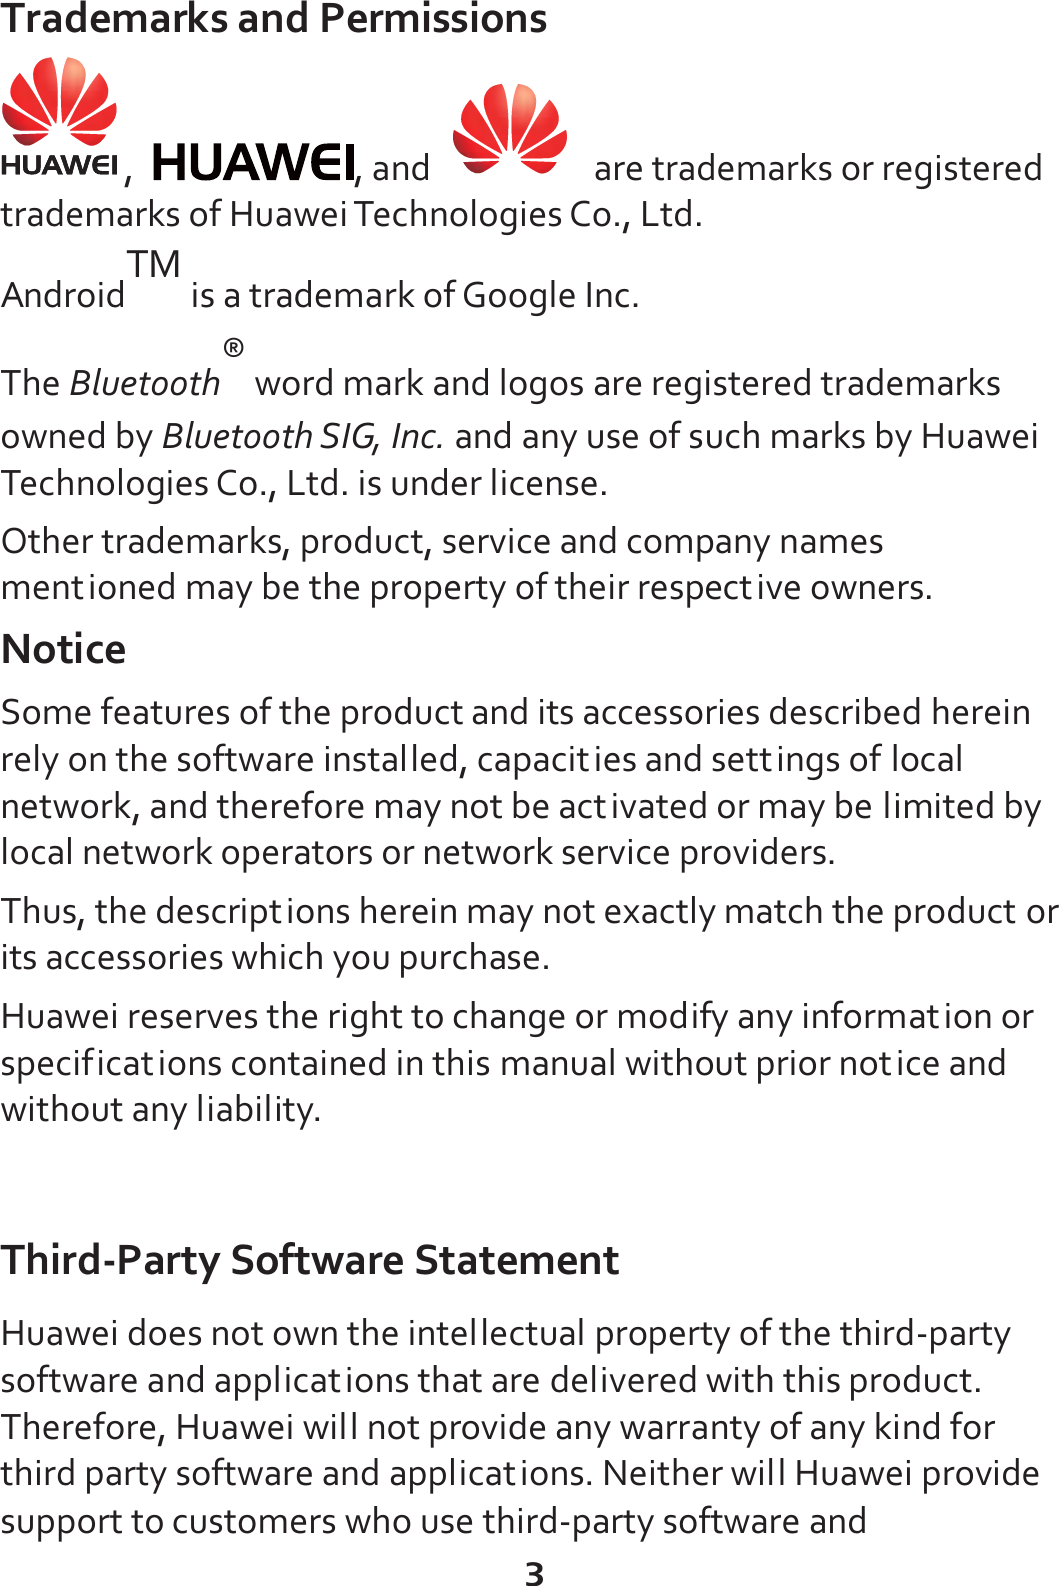 3 Trademarks and Permissions ,  , and     are trademarks or registered trademarks of Huawei Technologies Co., Ltd. AndroidTM is a trademark of Google Inc.   The Bluetooth® word mark and logos are registered trademarks owned by Bluetooth SIG, Inc. and any use of such marks by Huawei Technologies Co., Ltd. is under license. Other trademarks, product, service and company names mentioned may be the property of their respective owners. Notice Some features of the product and its accessories described herein rely on the software installed, capacities and settings of local network, and therefore may not be activated or may be limited by local network operators or network service providers. Thus, the descriptions herein may not exactly match the product or its accessories which you purchase. Huawei reserves the right to change or modify any information or specifications contained in this manual without prior notice and without any liability.  Third-Party Software Statement Huawei does not own the intellectual property of the third-party software and applications that are delivered with this product. Therefore, Huawei will not provide any warranty of any kind for third party software and applications. Neither will Huawei provide support to customers who use third-party software and 